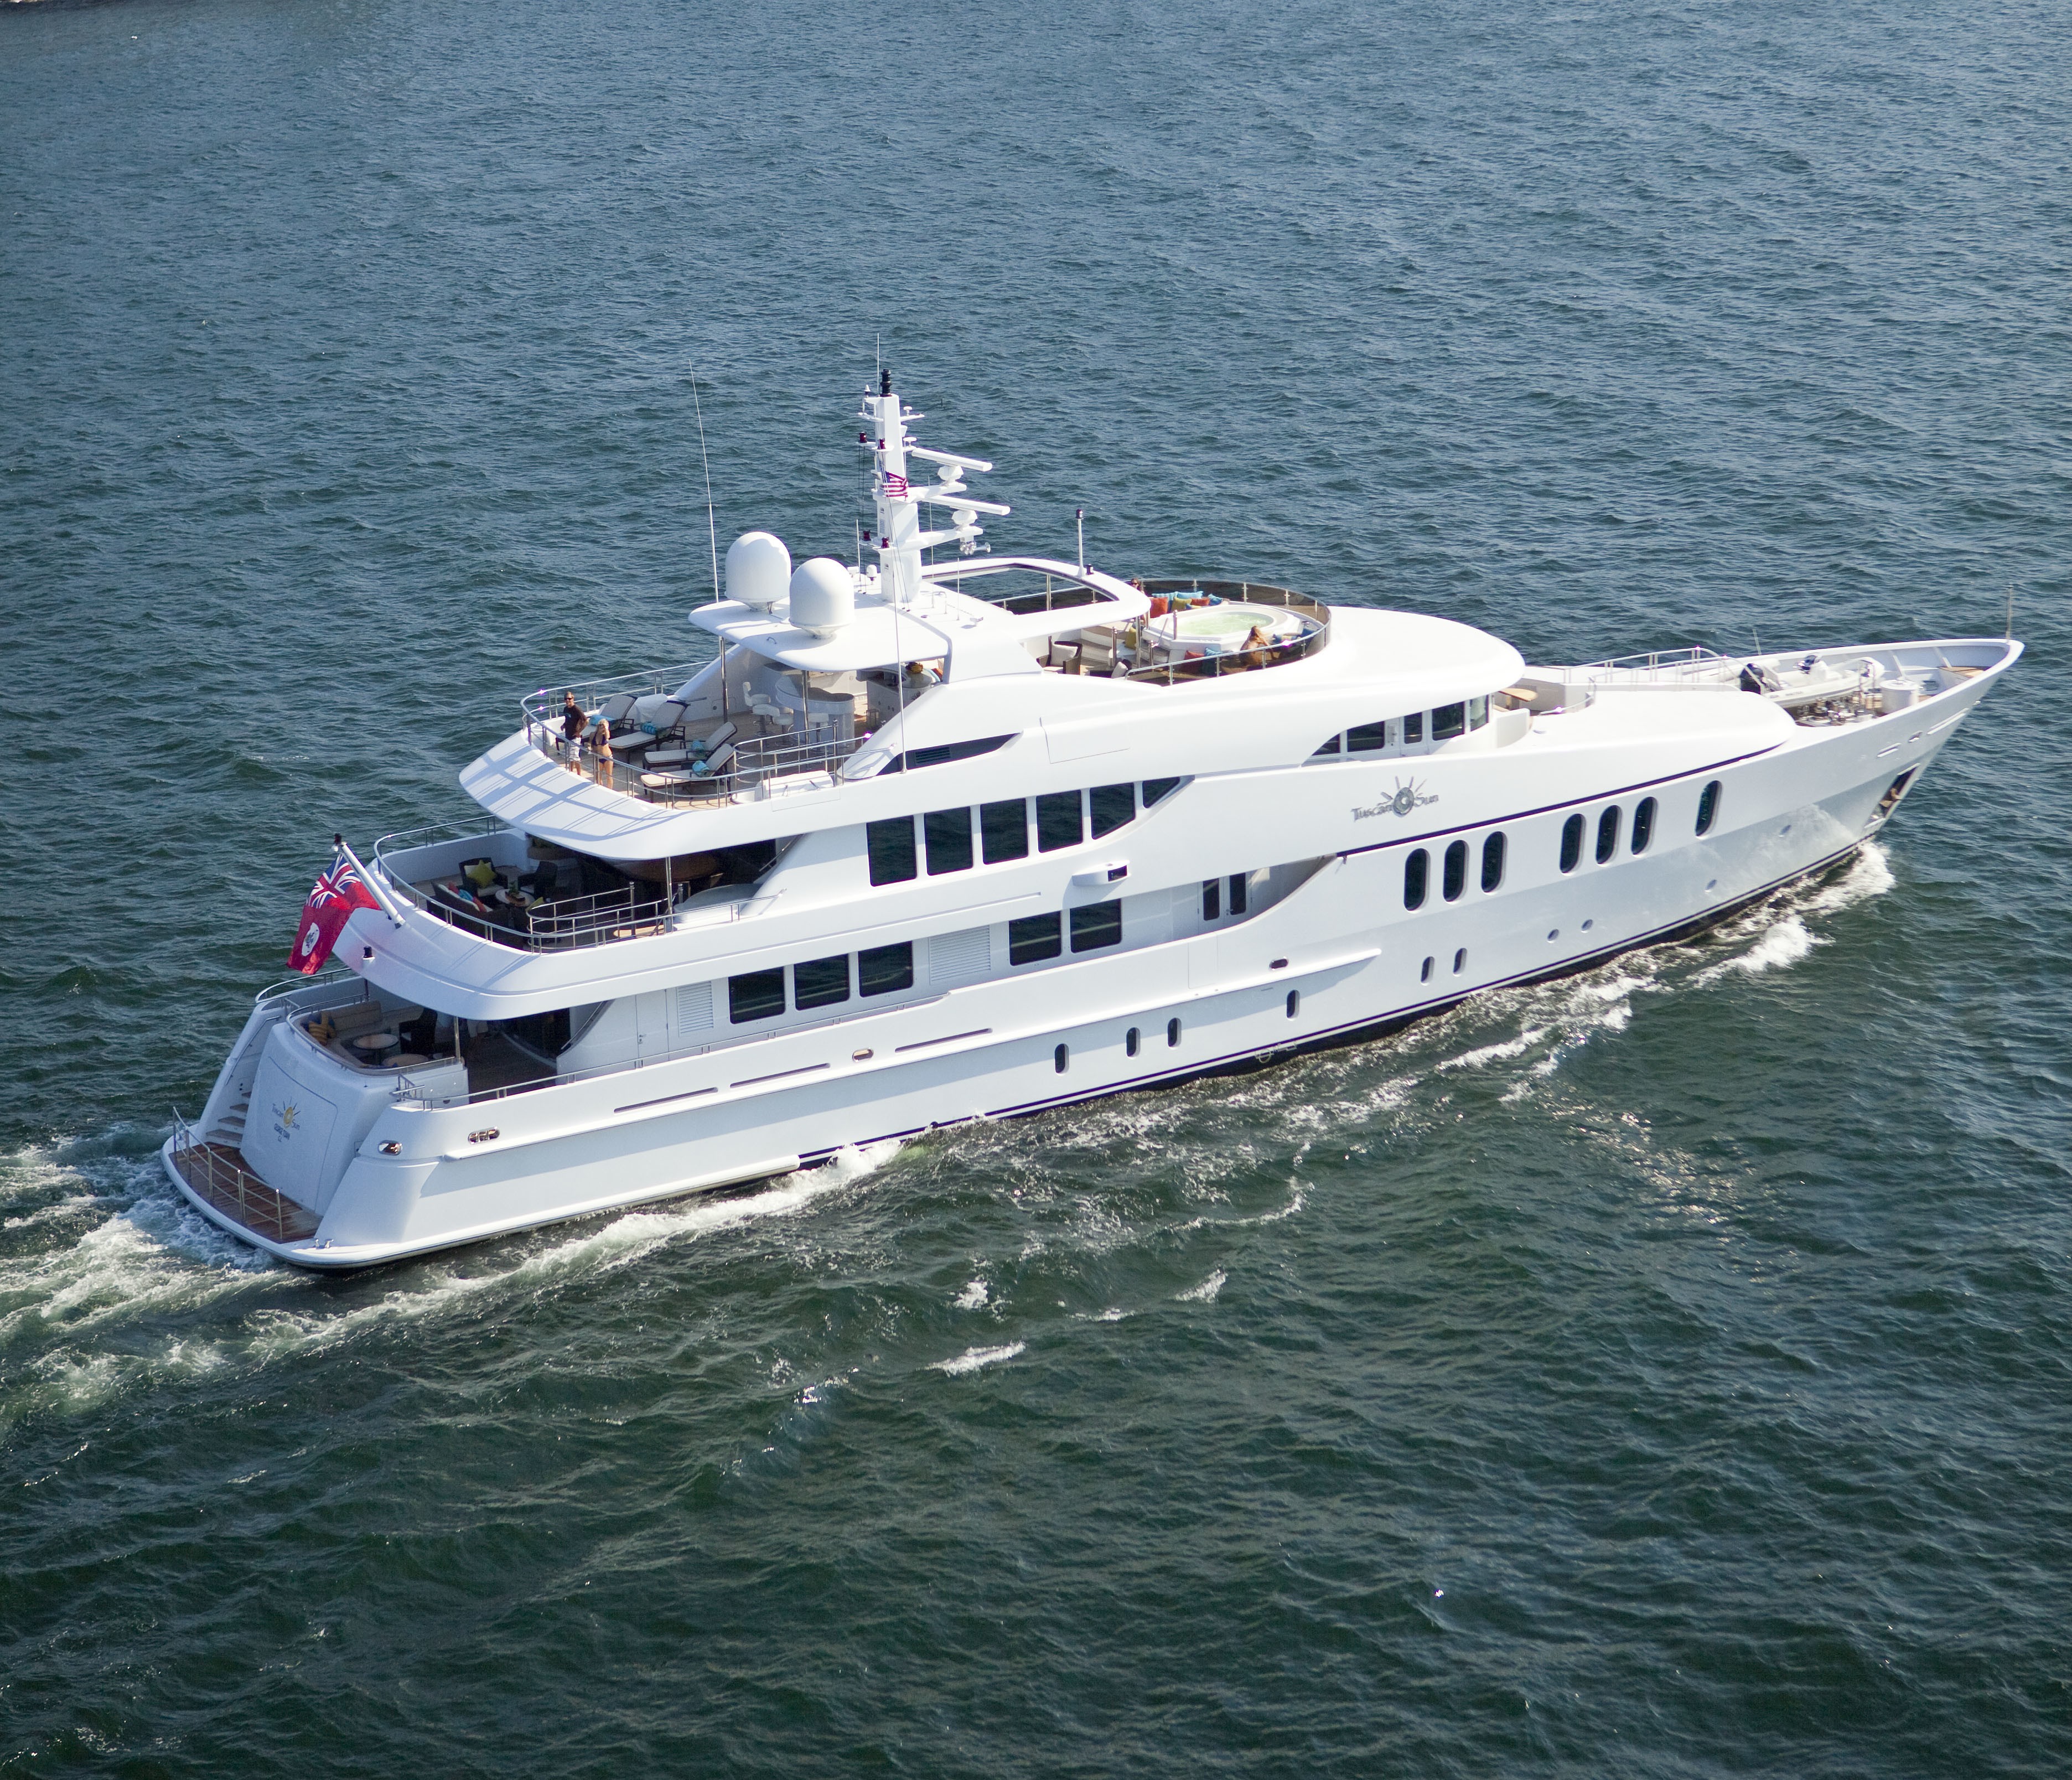 From Above Aspect: Yacht COCO VIENTE's Cruising Image